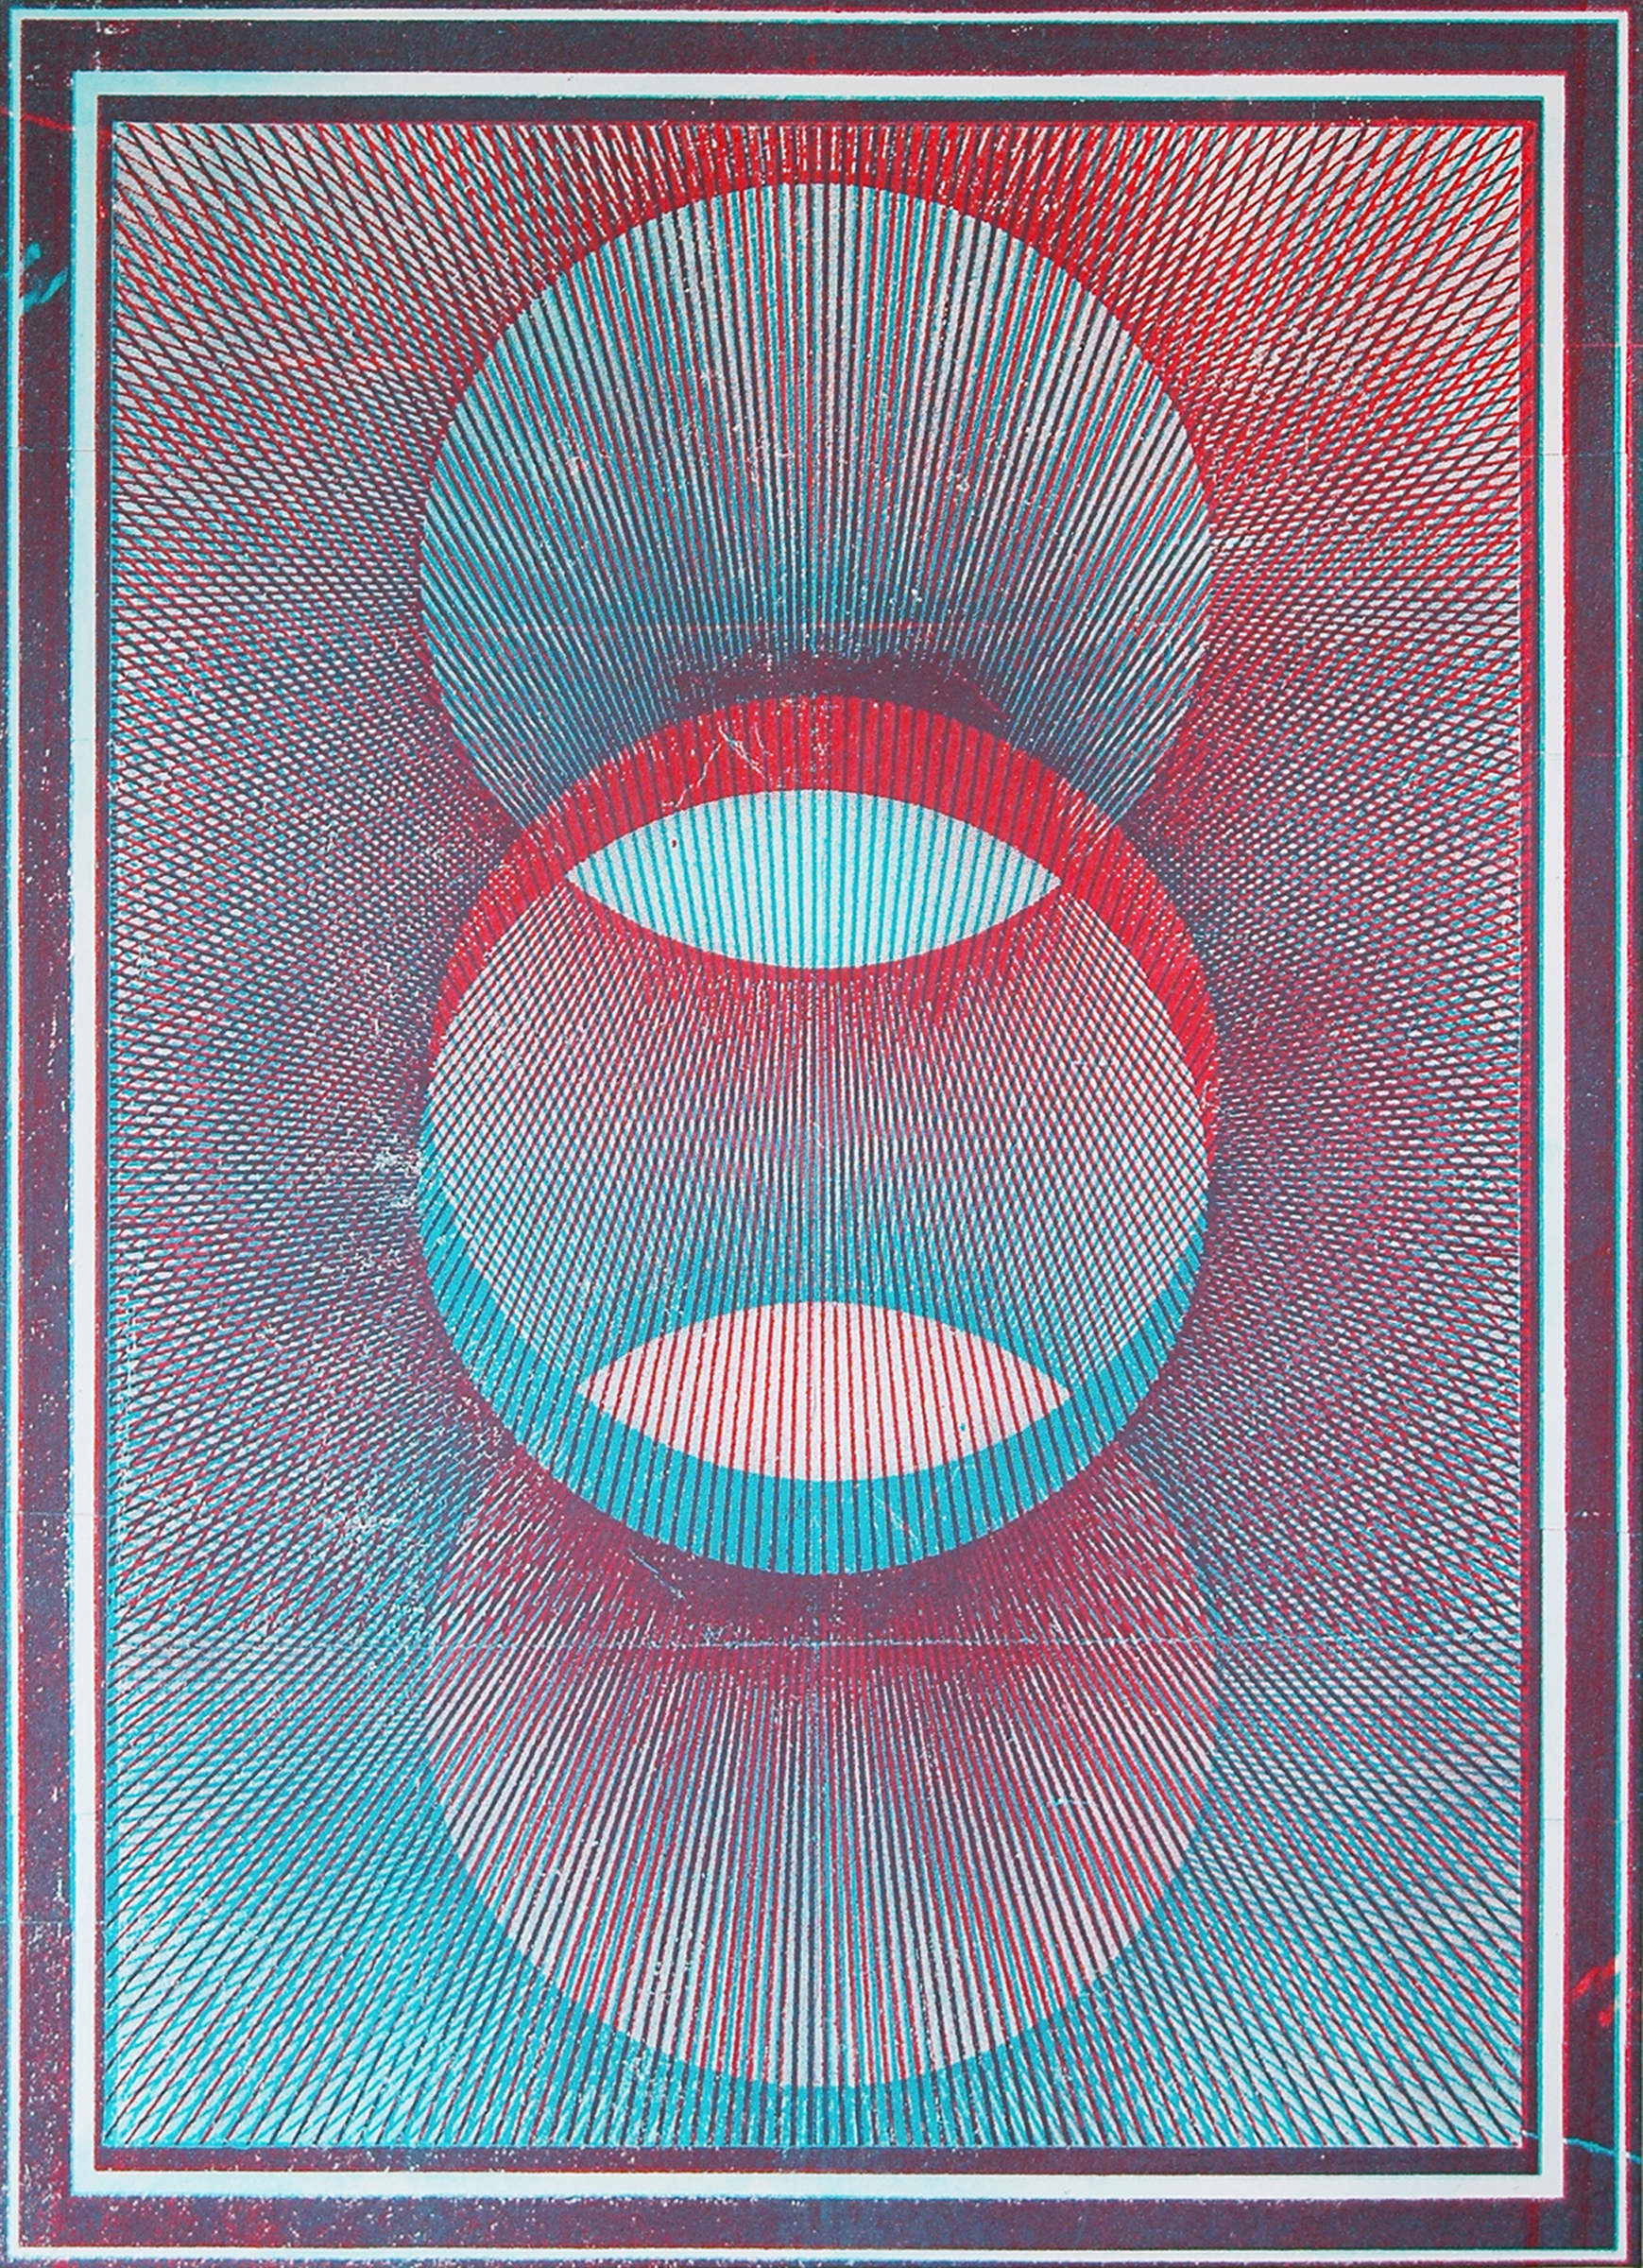  GWENAËL RATTKE  Projections II (red &amp; blue) , 2012 acrylic and silkscreen with hand working on canvas, 48.25” x 34.75” 